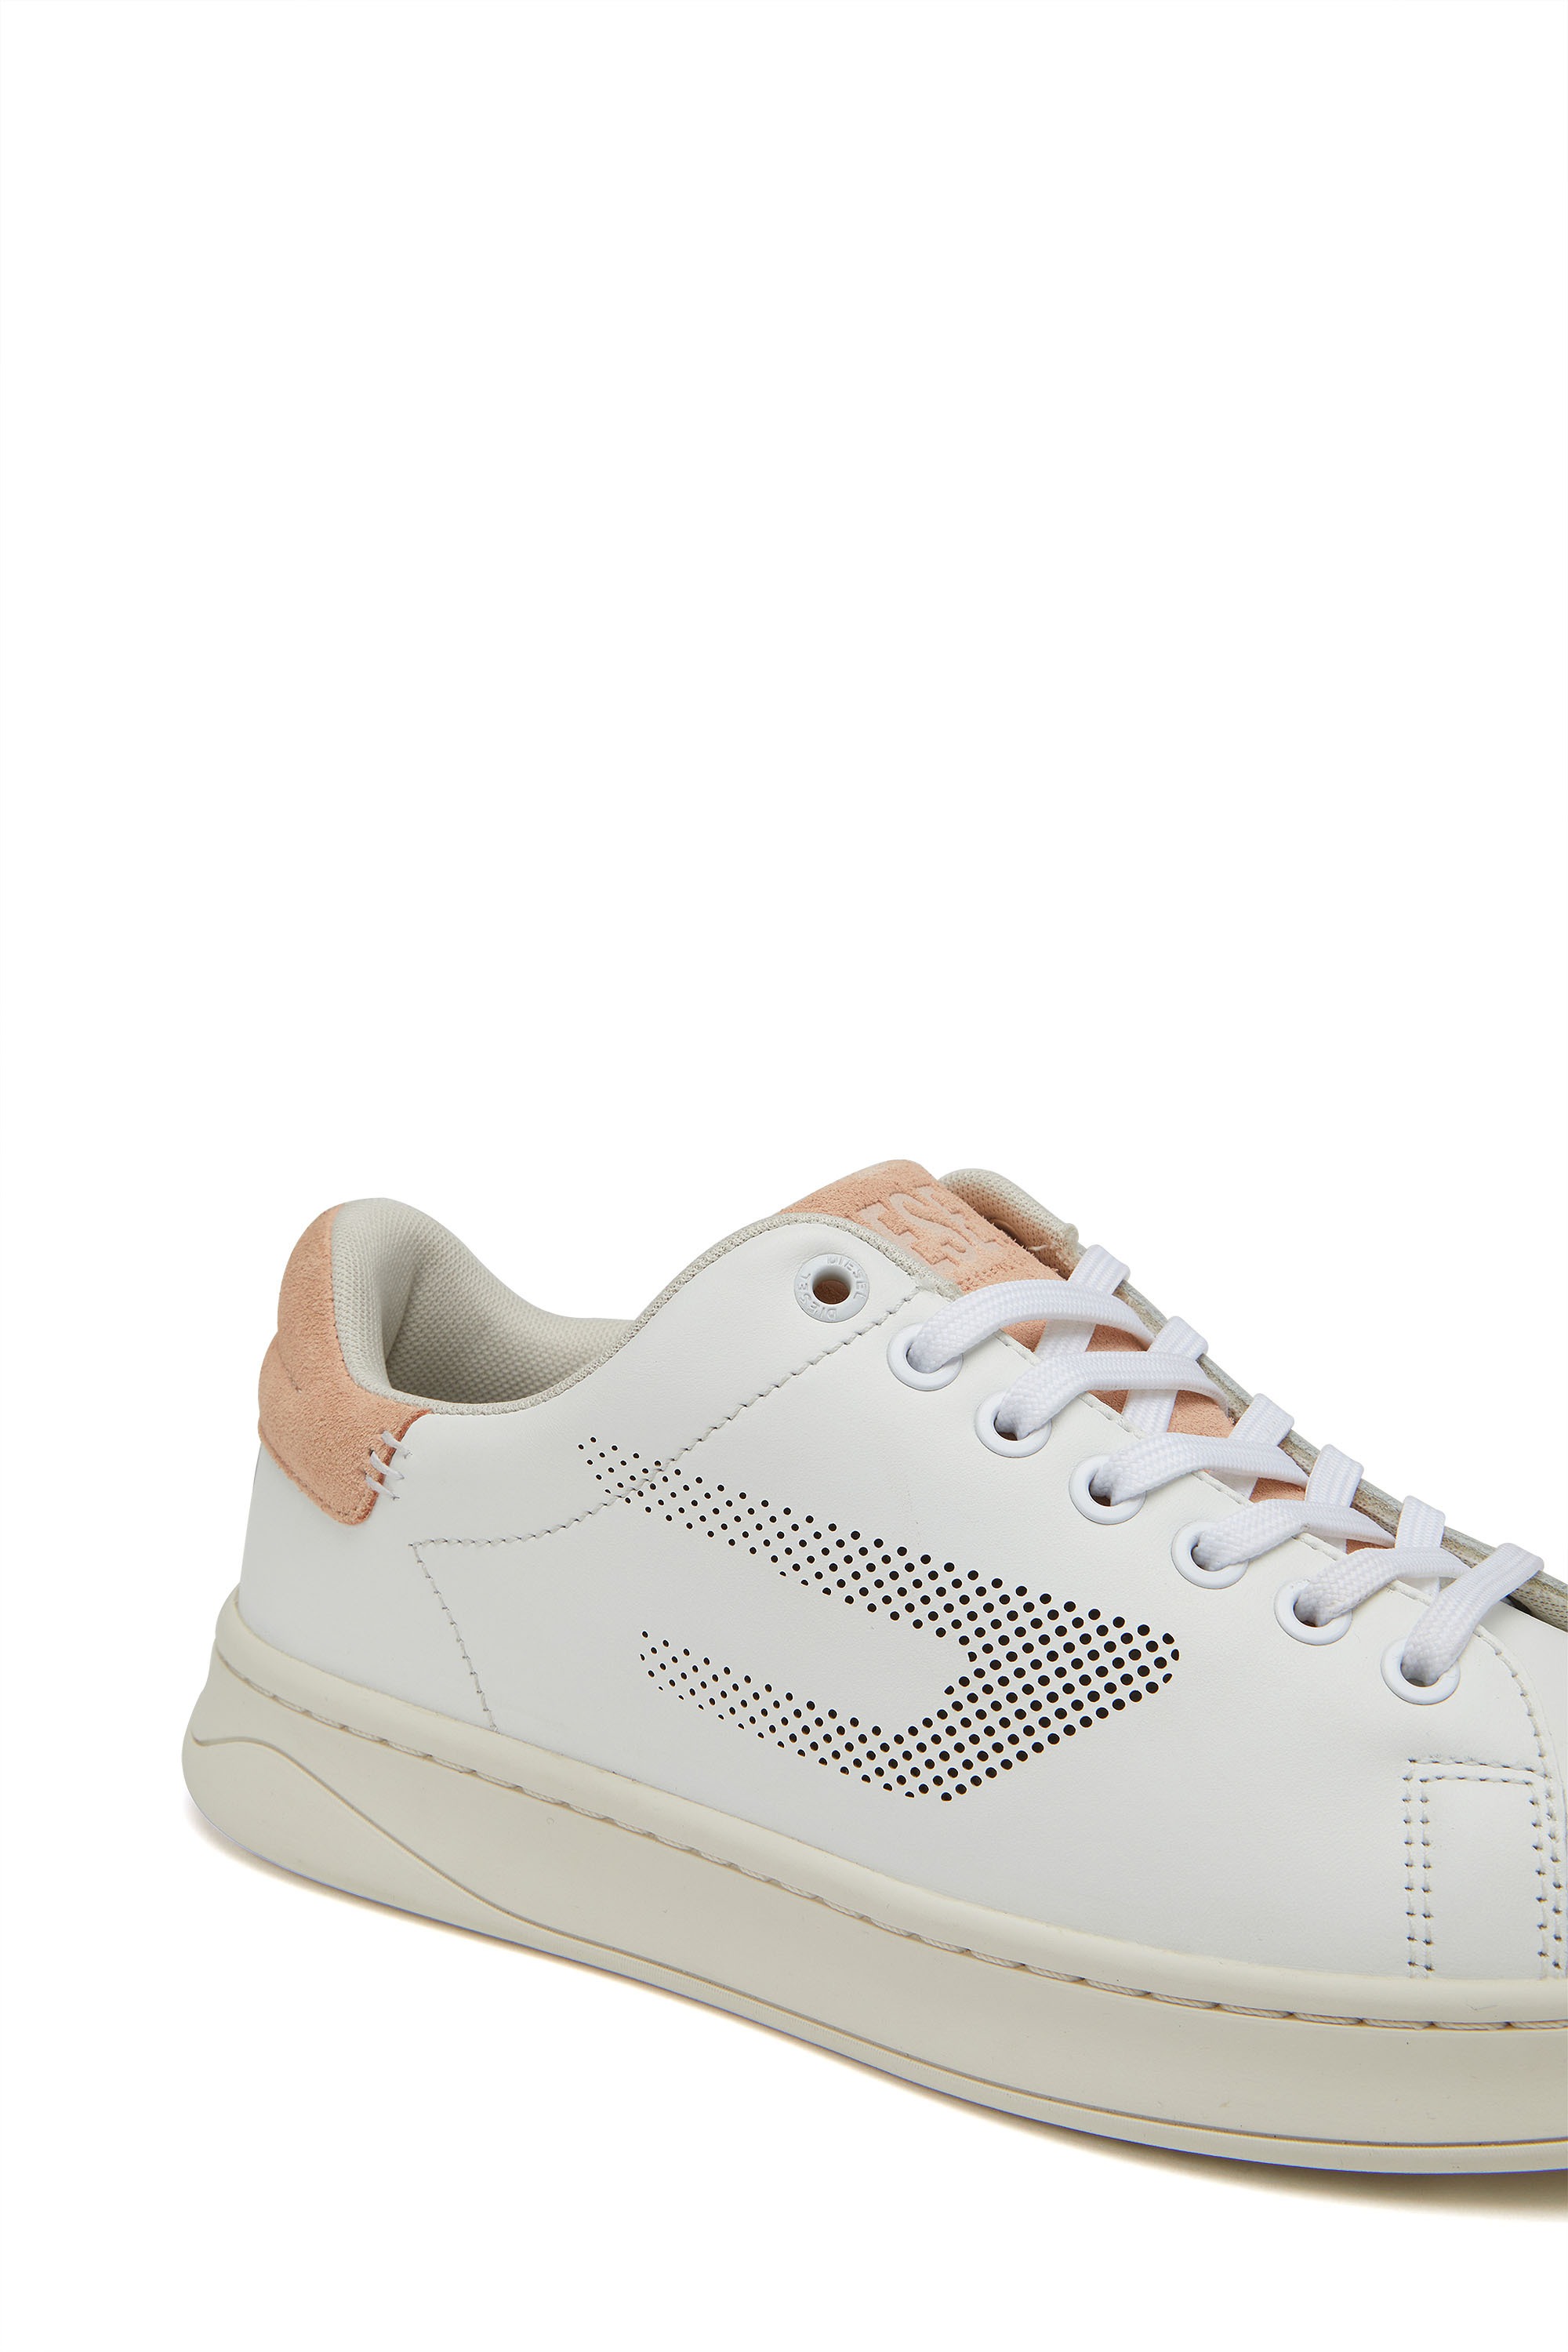 Diesel - S-ATHENE LOW W, Weiss/Rosa - Image 6